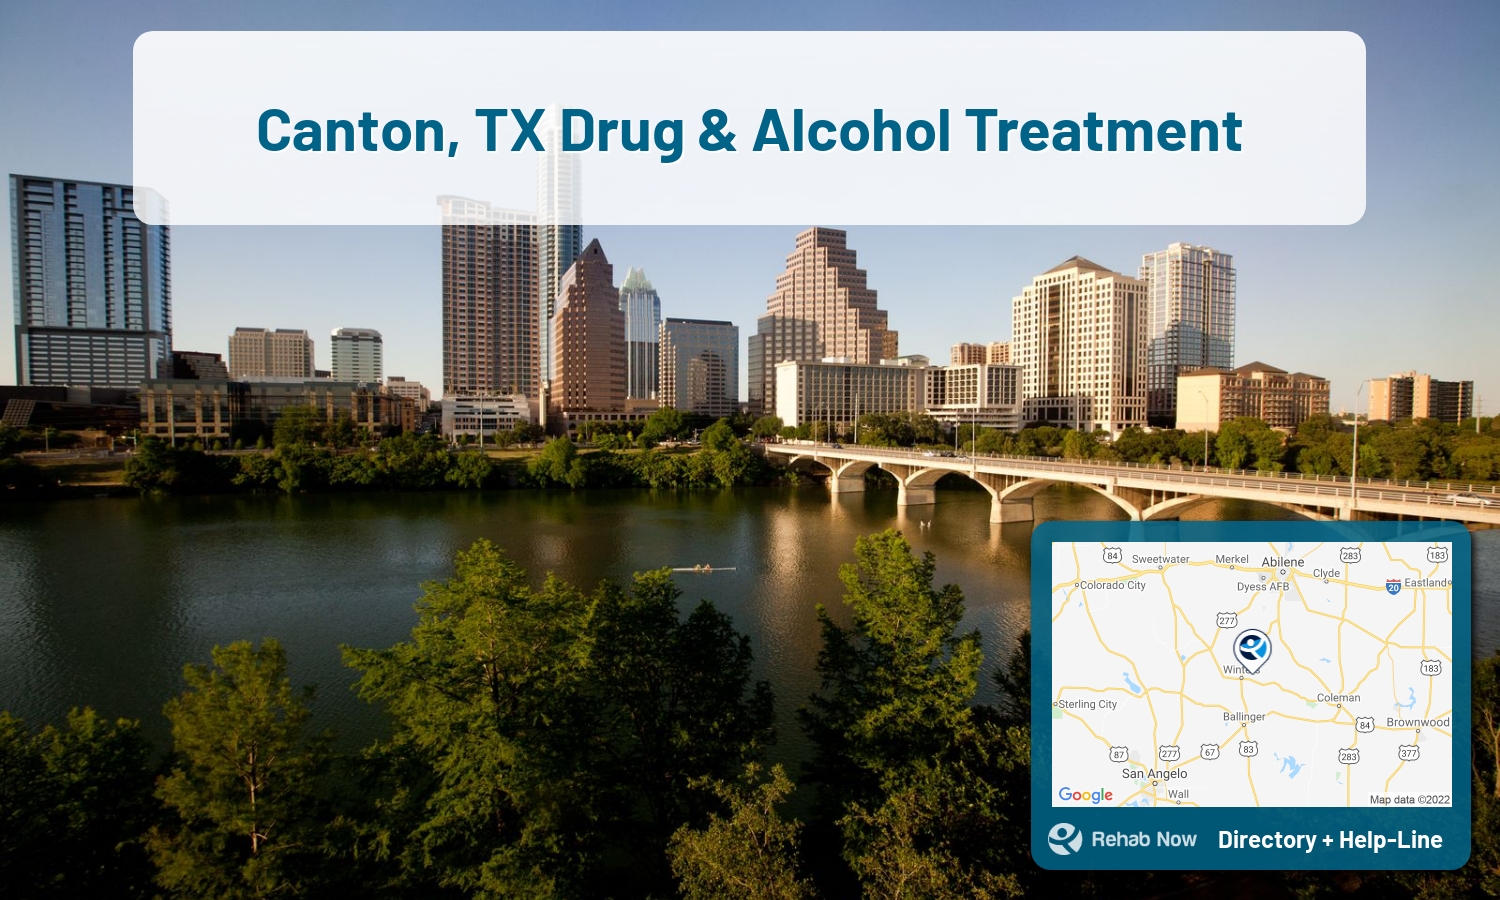 Our experts can help you find treatment now in Canton, Texas. We list drug rehab and alcohol centers in Texas.